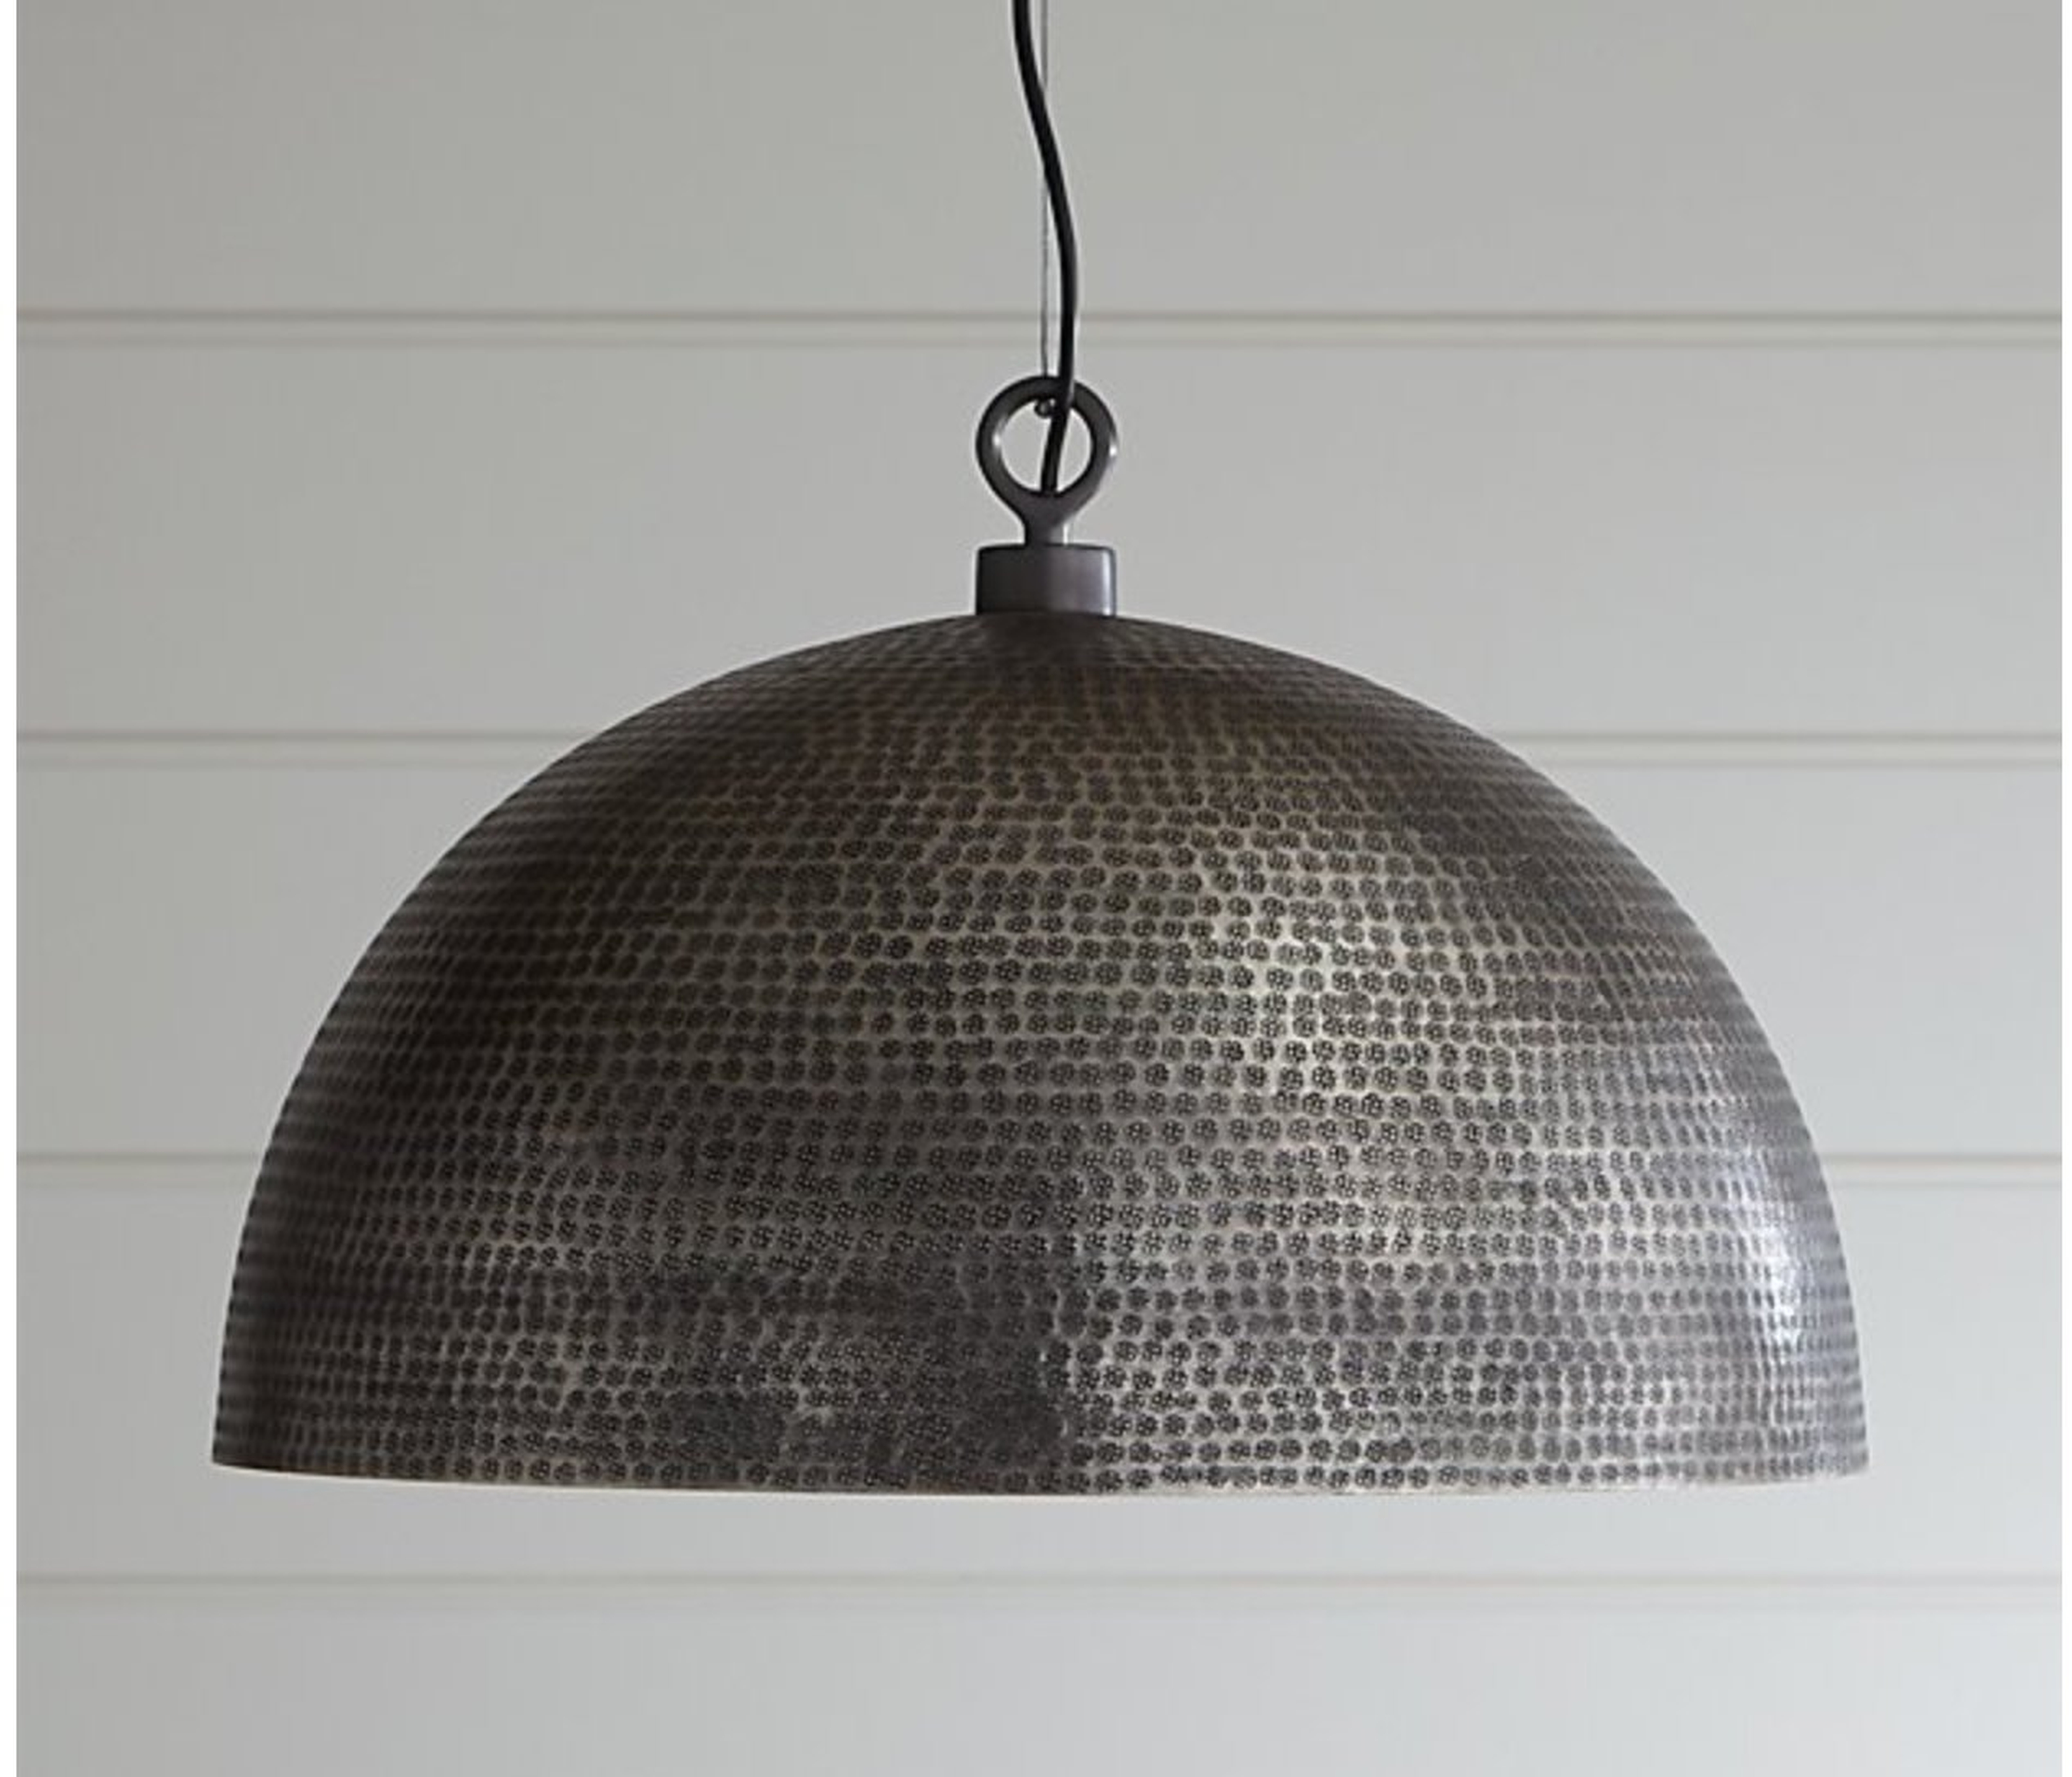 Rodan Hammered Brass Metal Dome Pendant Light - Crate and Barrel